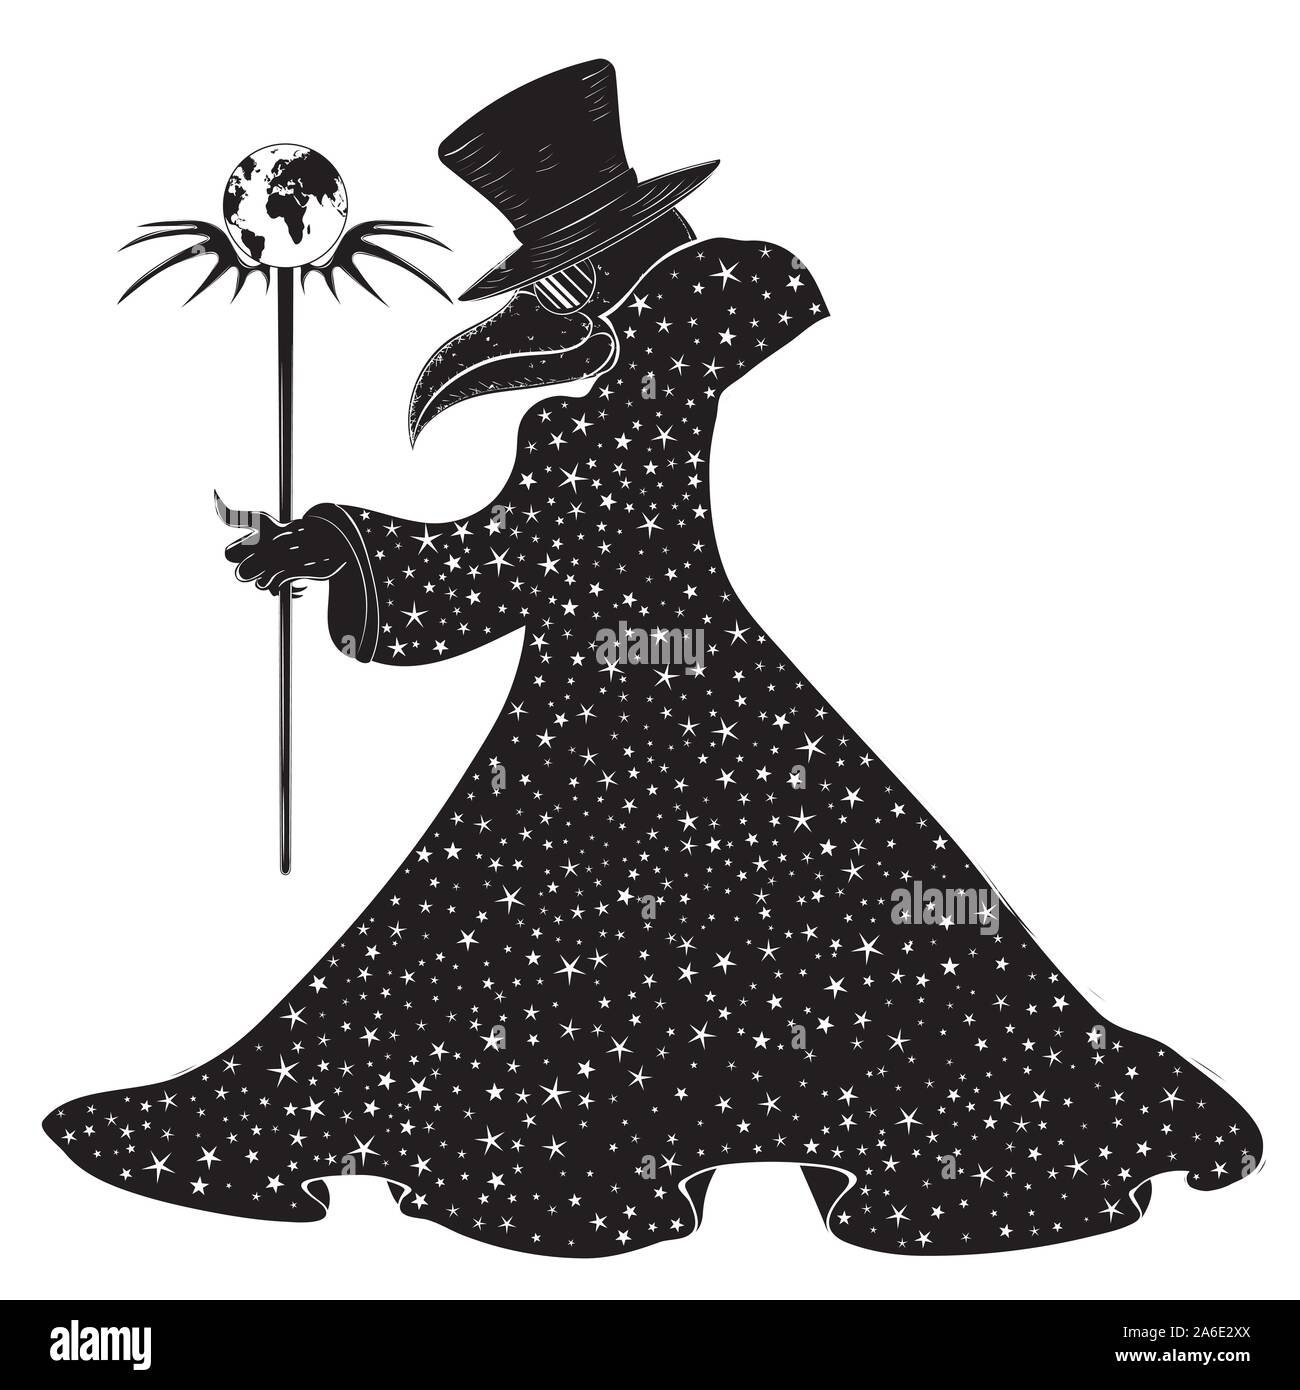 Ancient plague doctor in starry coat, art deco inspired, modern retro style illustration. Stock Vector